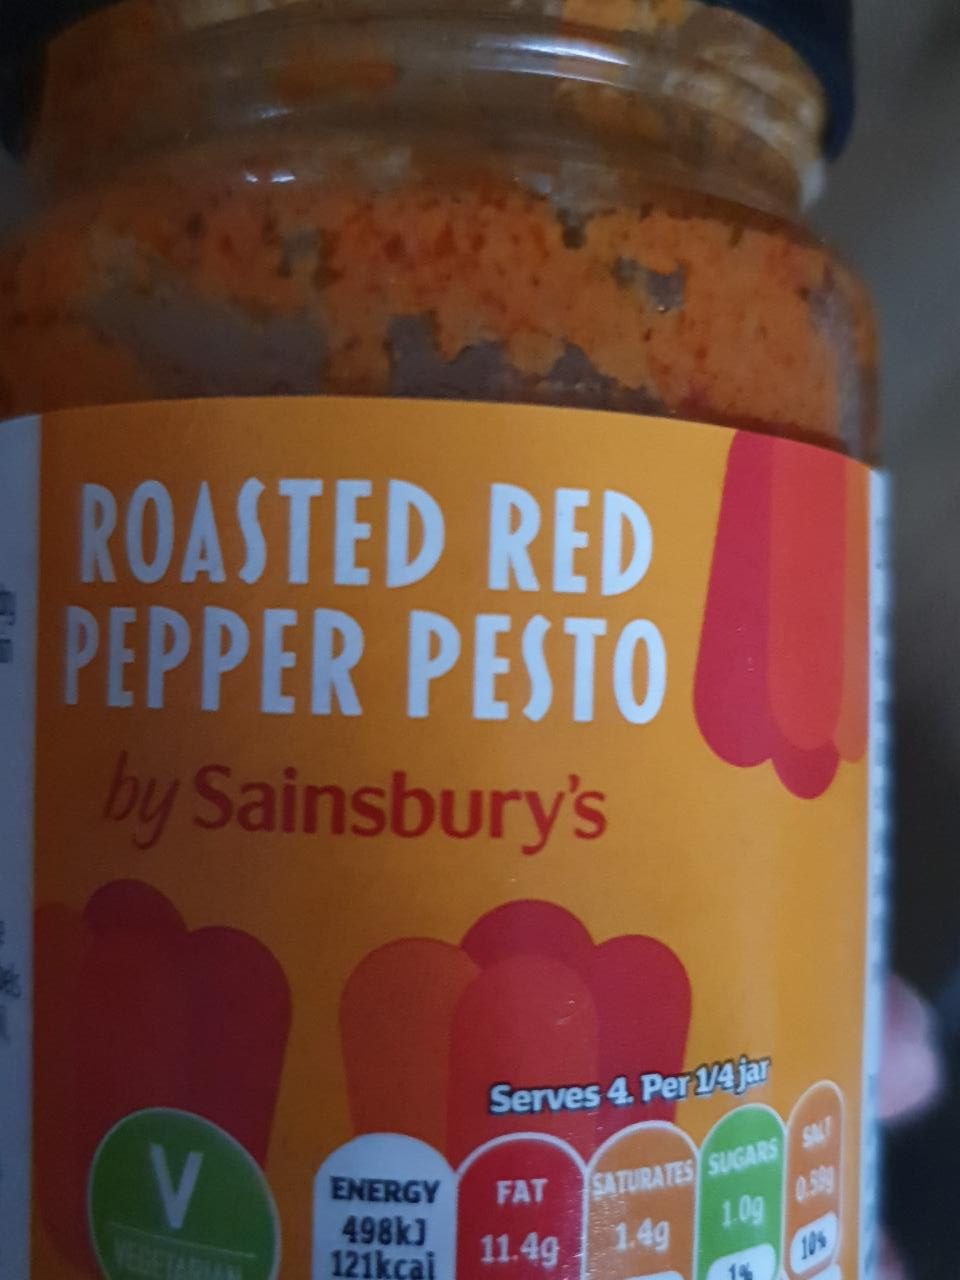 Fotografie - roasted red pepper pesto by Sainsbury's